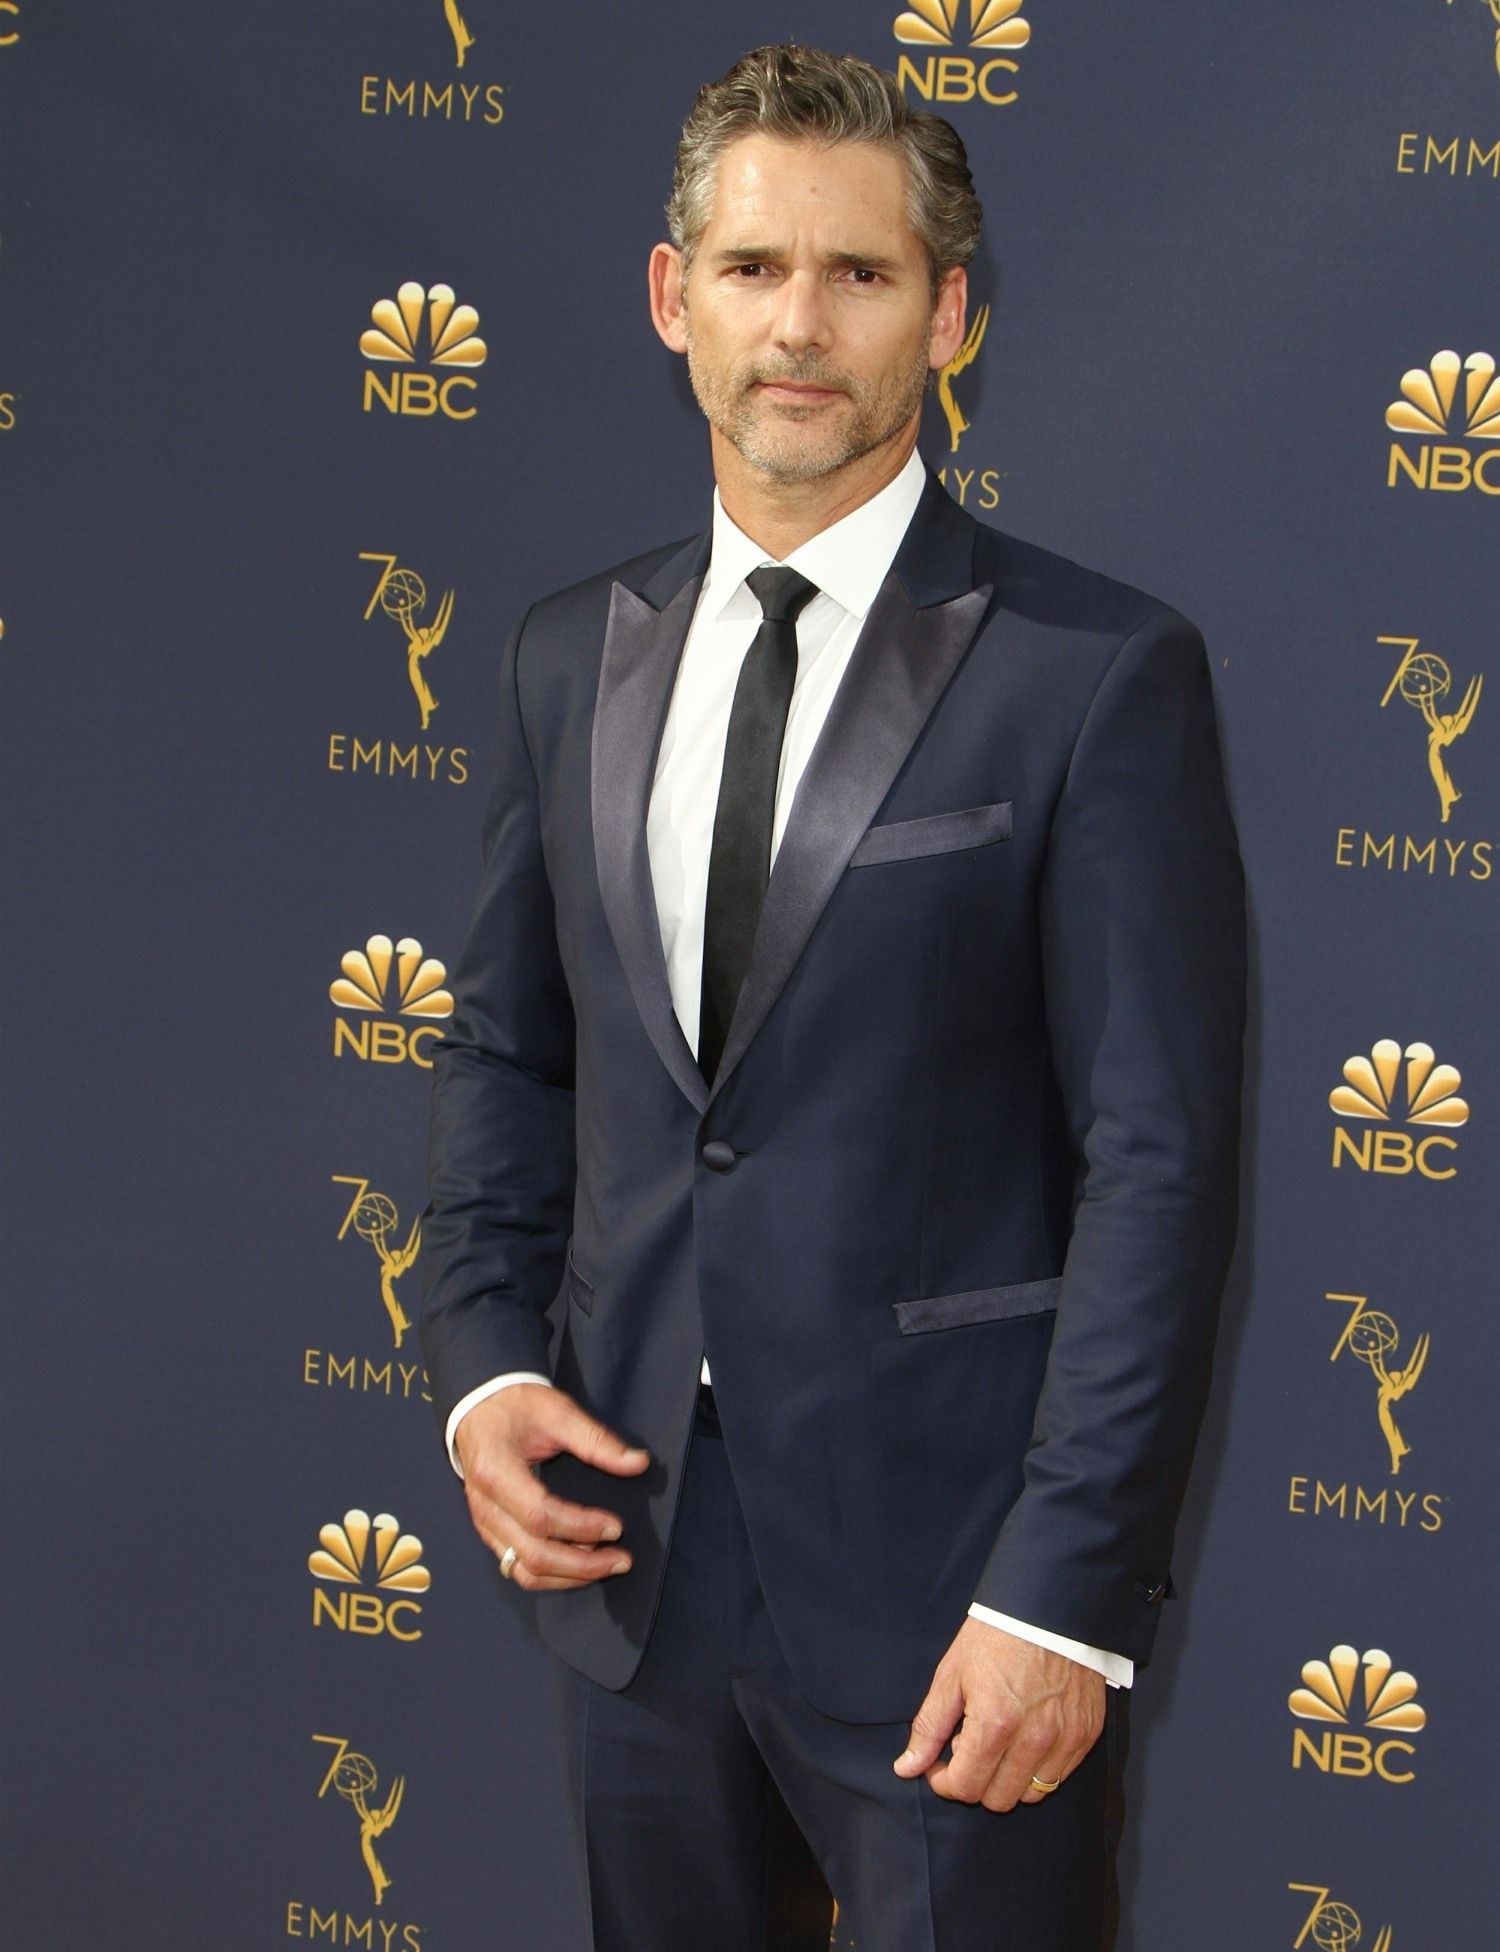 Stars arriving at The 70th Emmy Awards